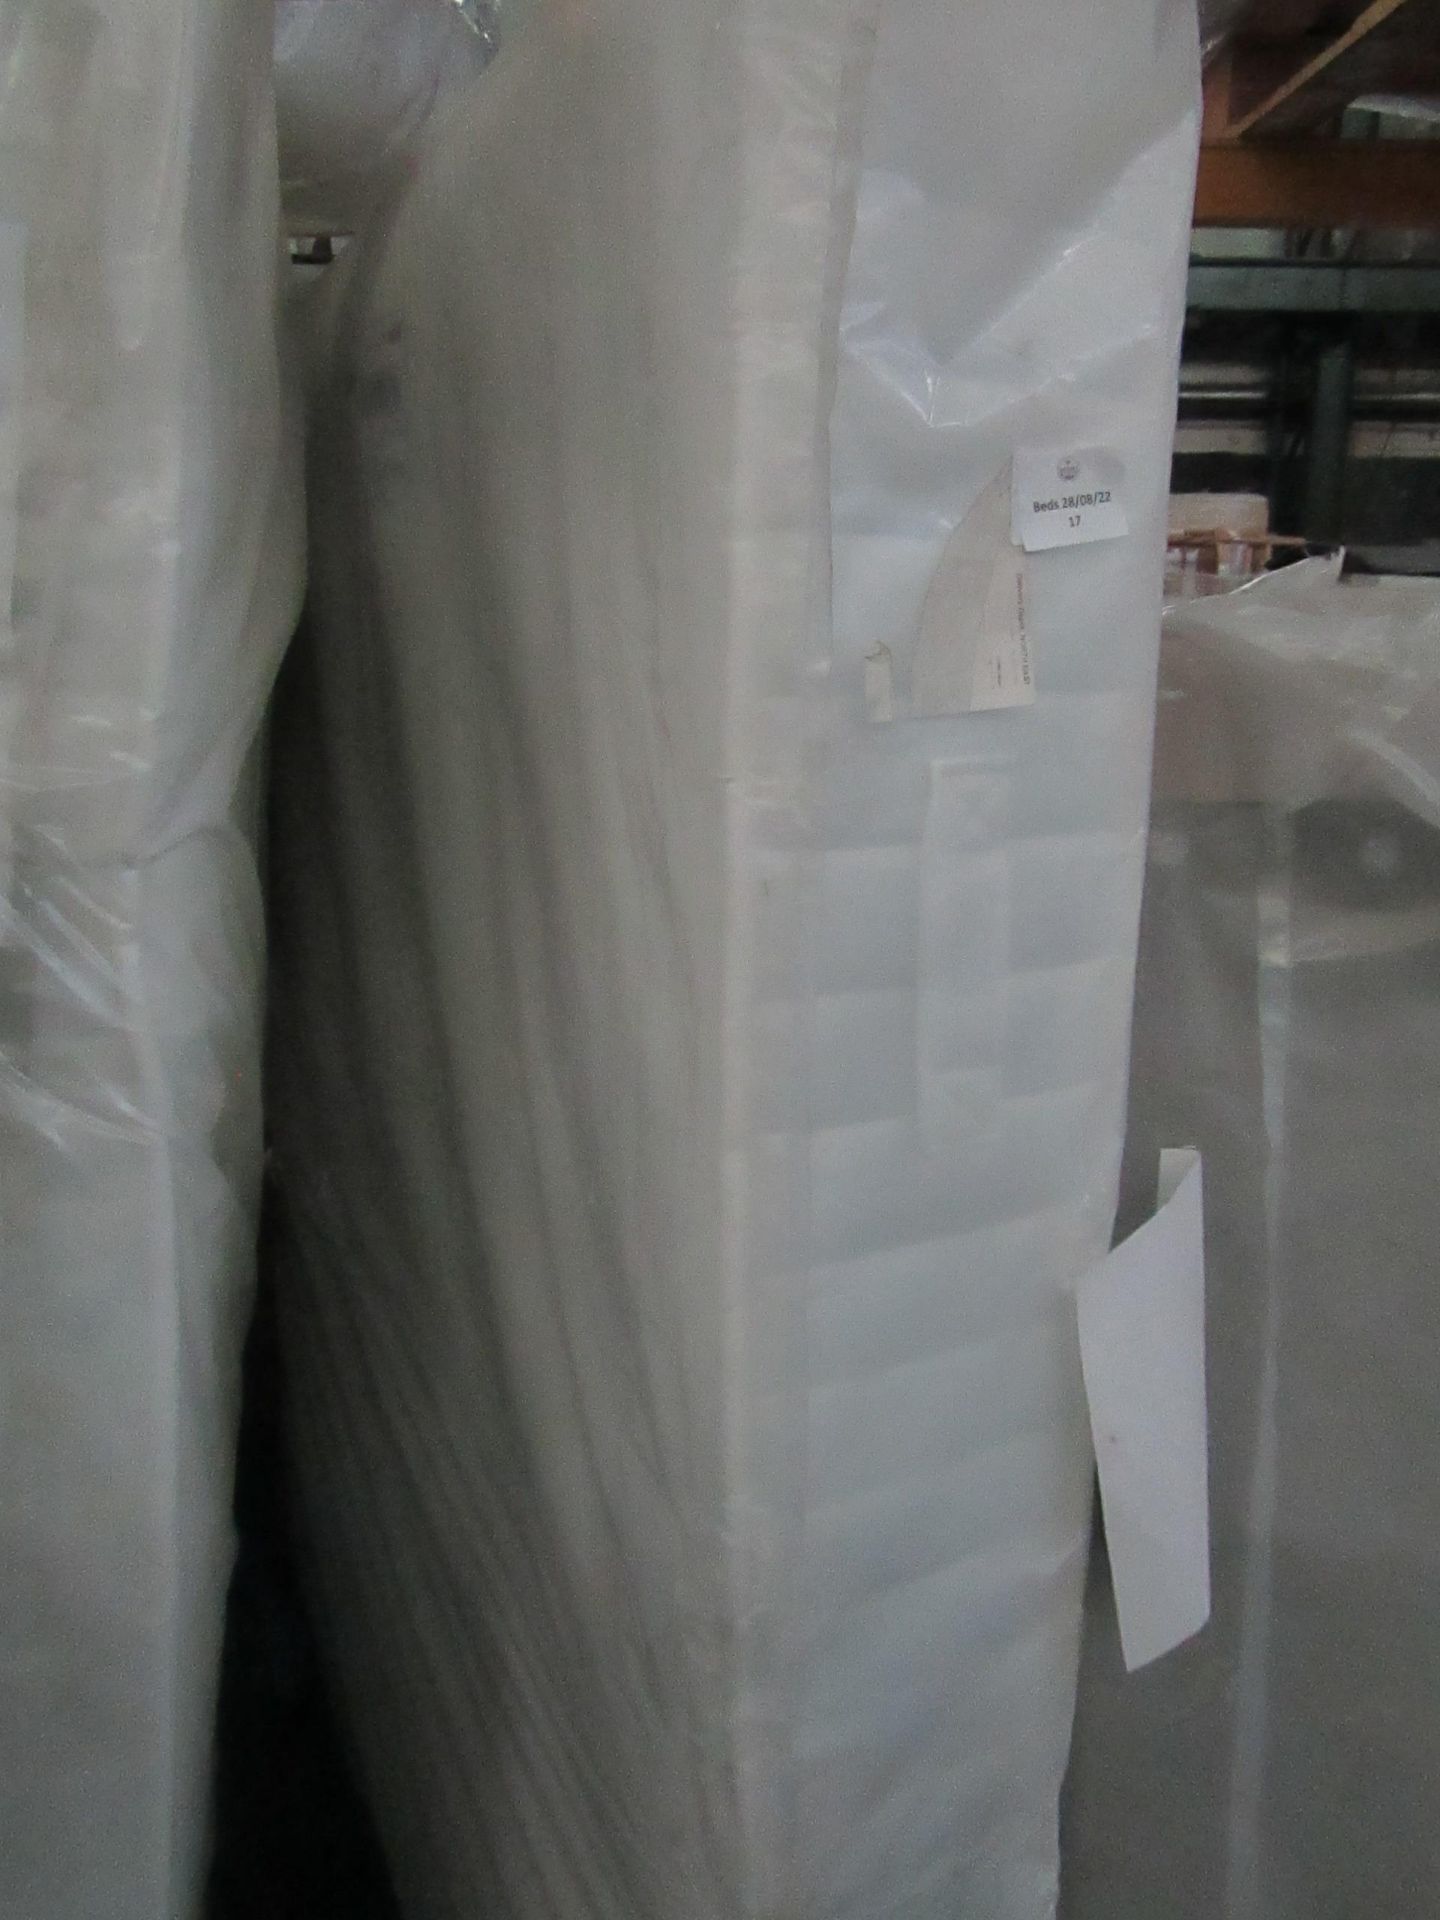 Sleepright modena 1000 4ft 6 firmer mattress, appears to be in good condition and bagged, RRP œ399 - Image 2 of 2